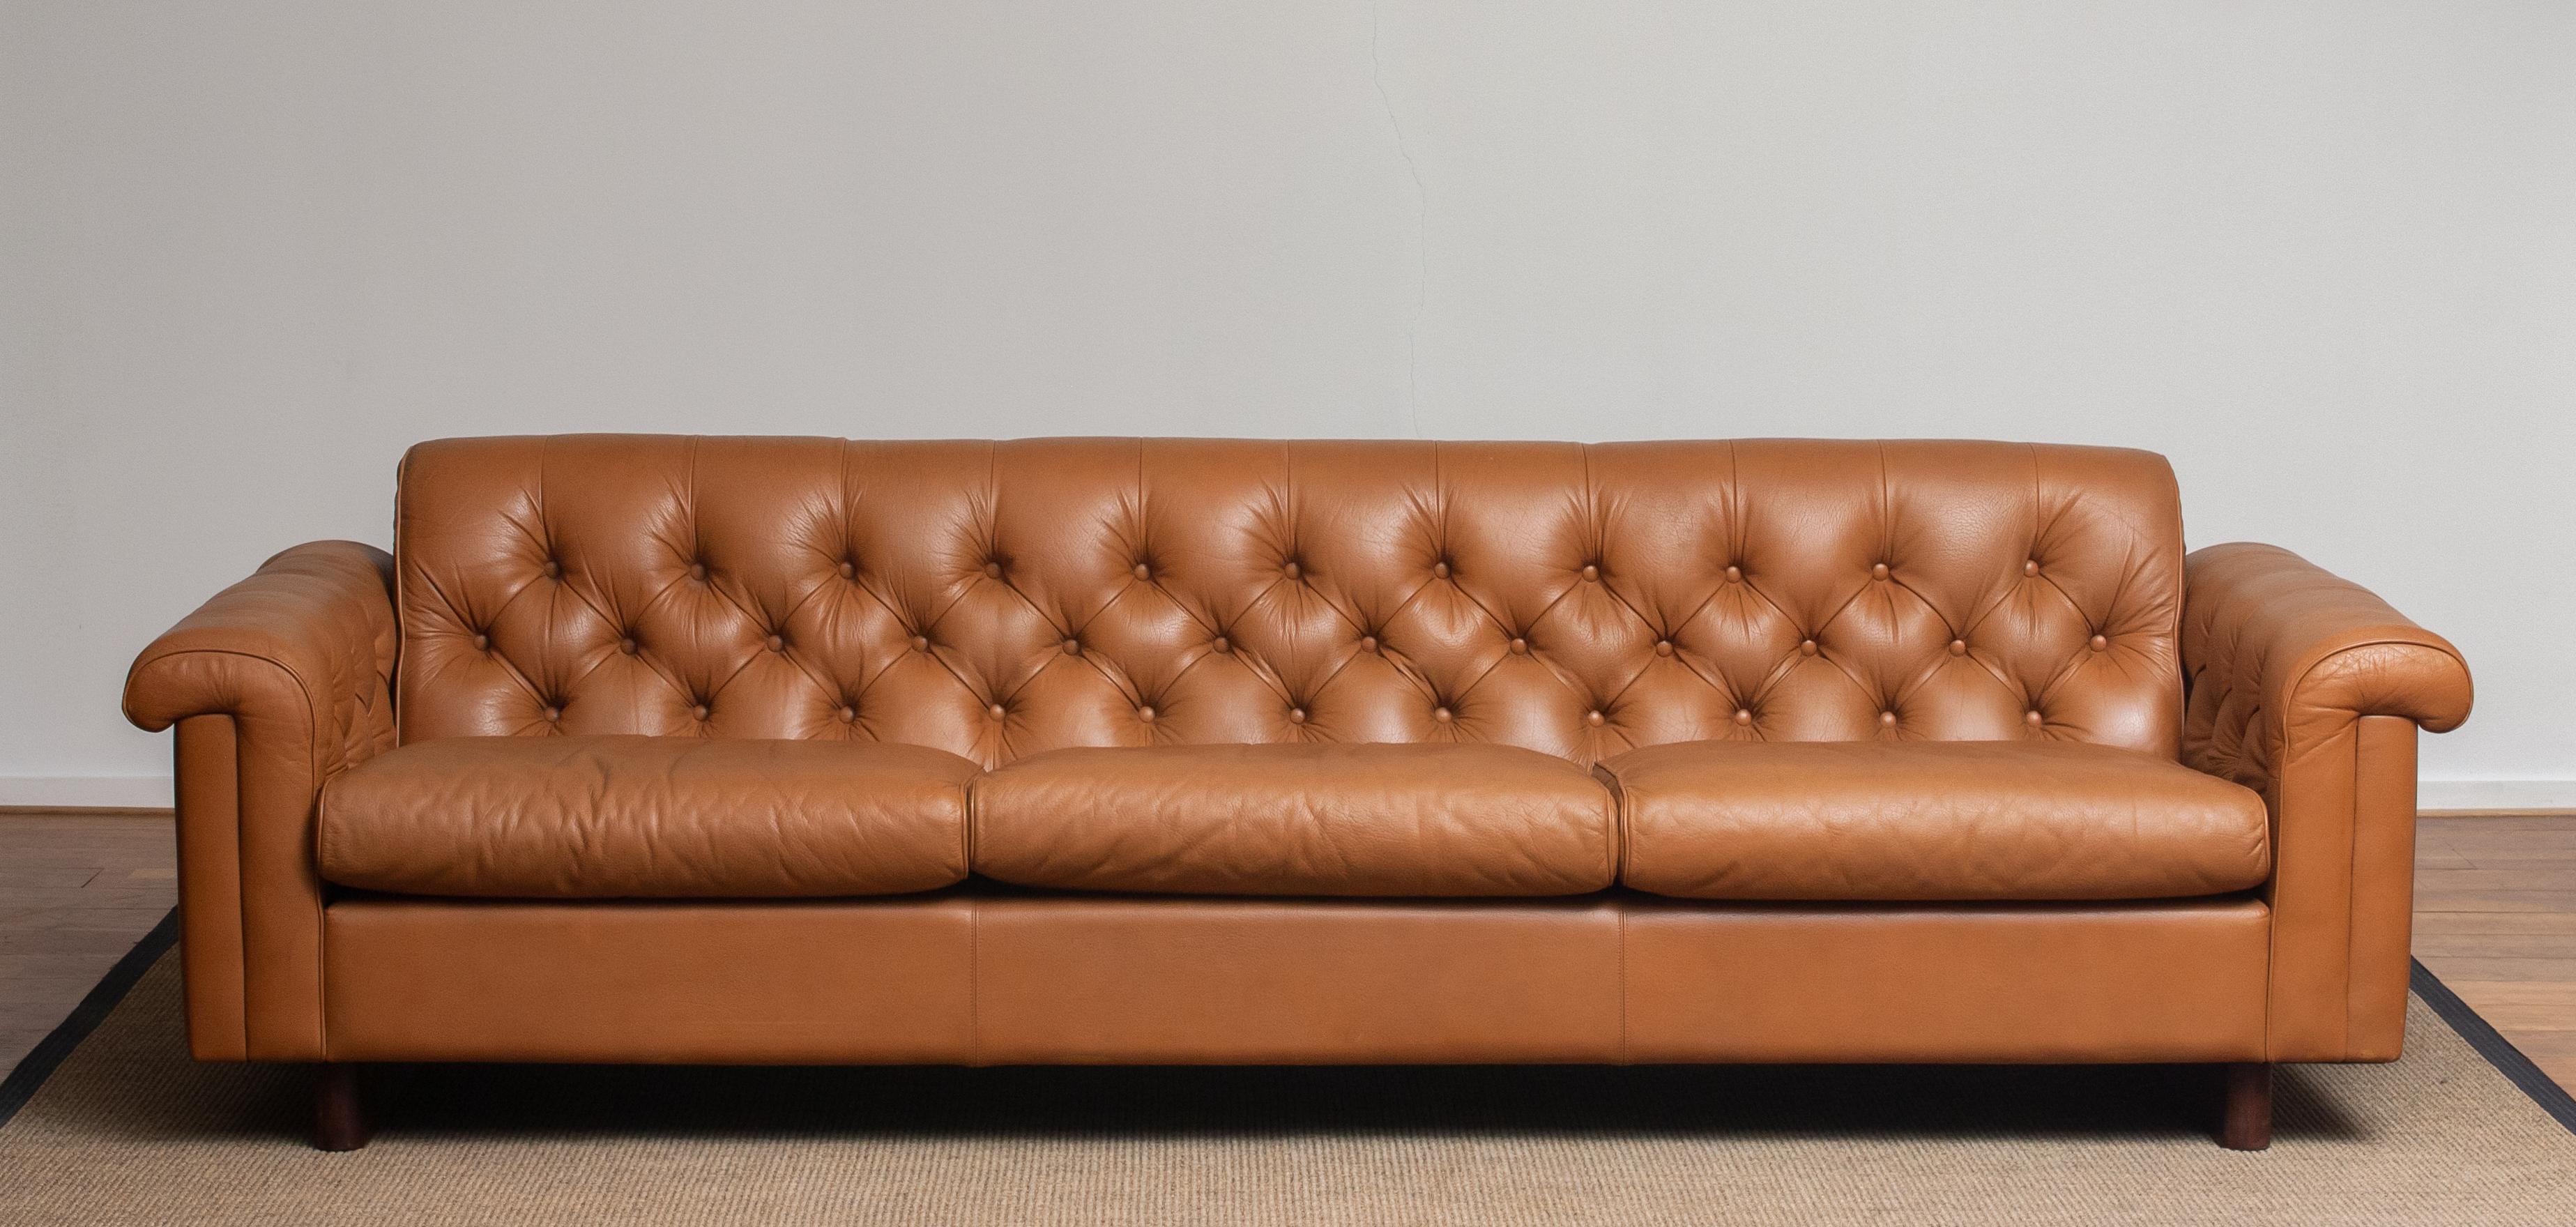 Absolutely rare and beautiful ( Chesterfield model ) sofa in camel color tufted leather from the second half of the 70's designed by Karl Erik Ekselius for JOC Design Vetlanda in Sweden. (Labeled)
This sofa feels soft and sits extremely